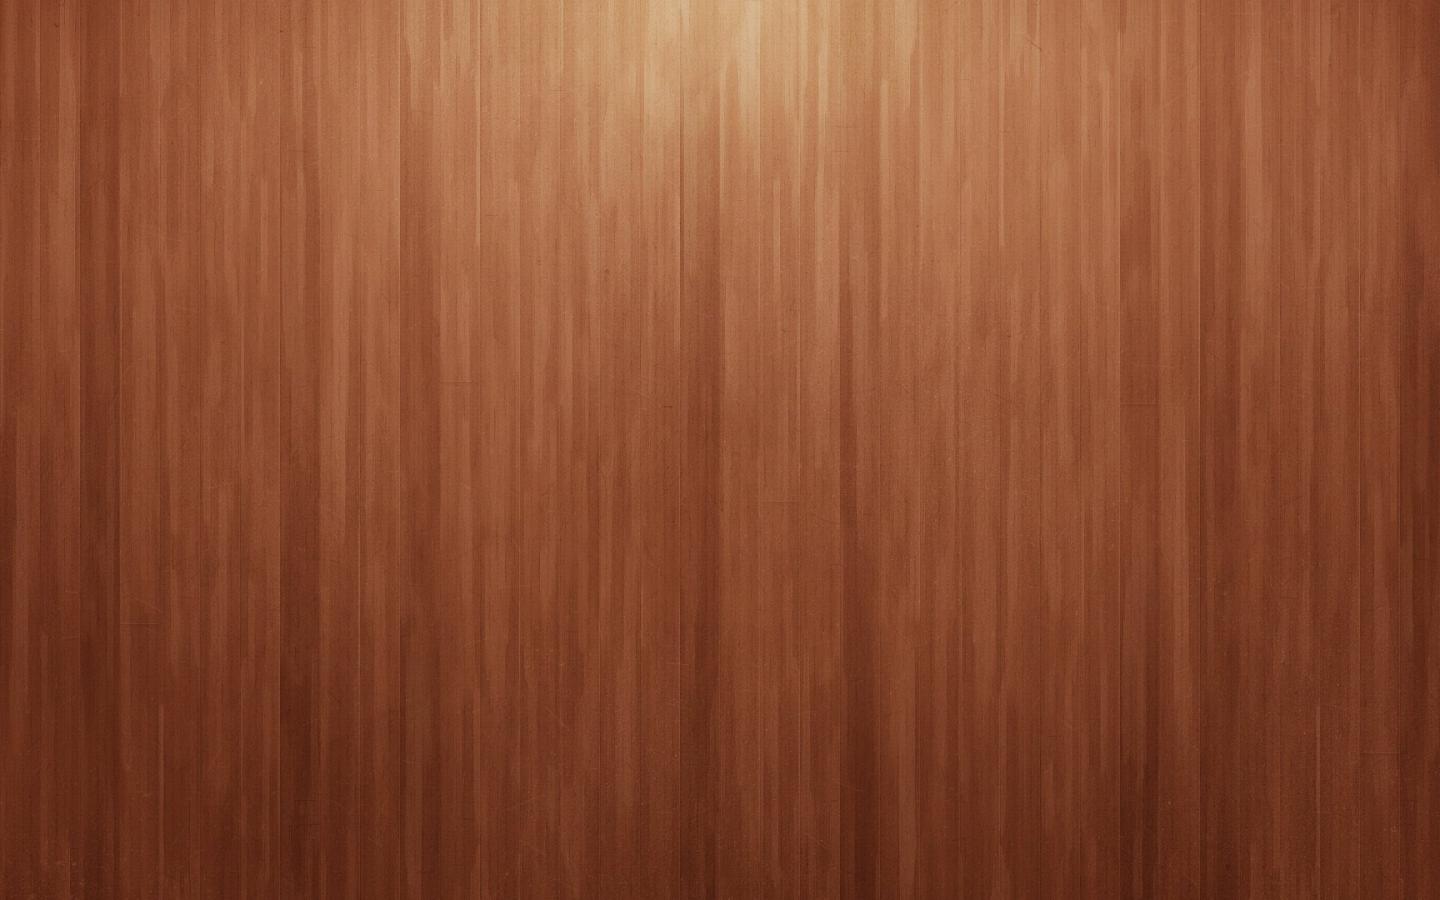 Wallpaper That Looks Like Wood 06 0f 10 with Plywood Surface Wallpaper. Wallpaper Download. High Resolution Wallpaper